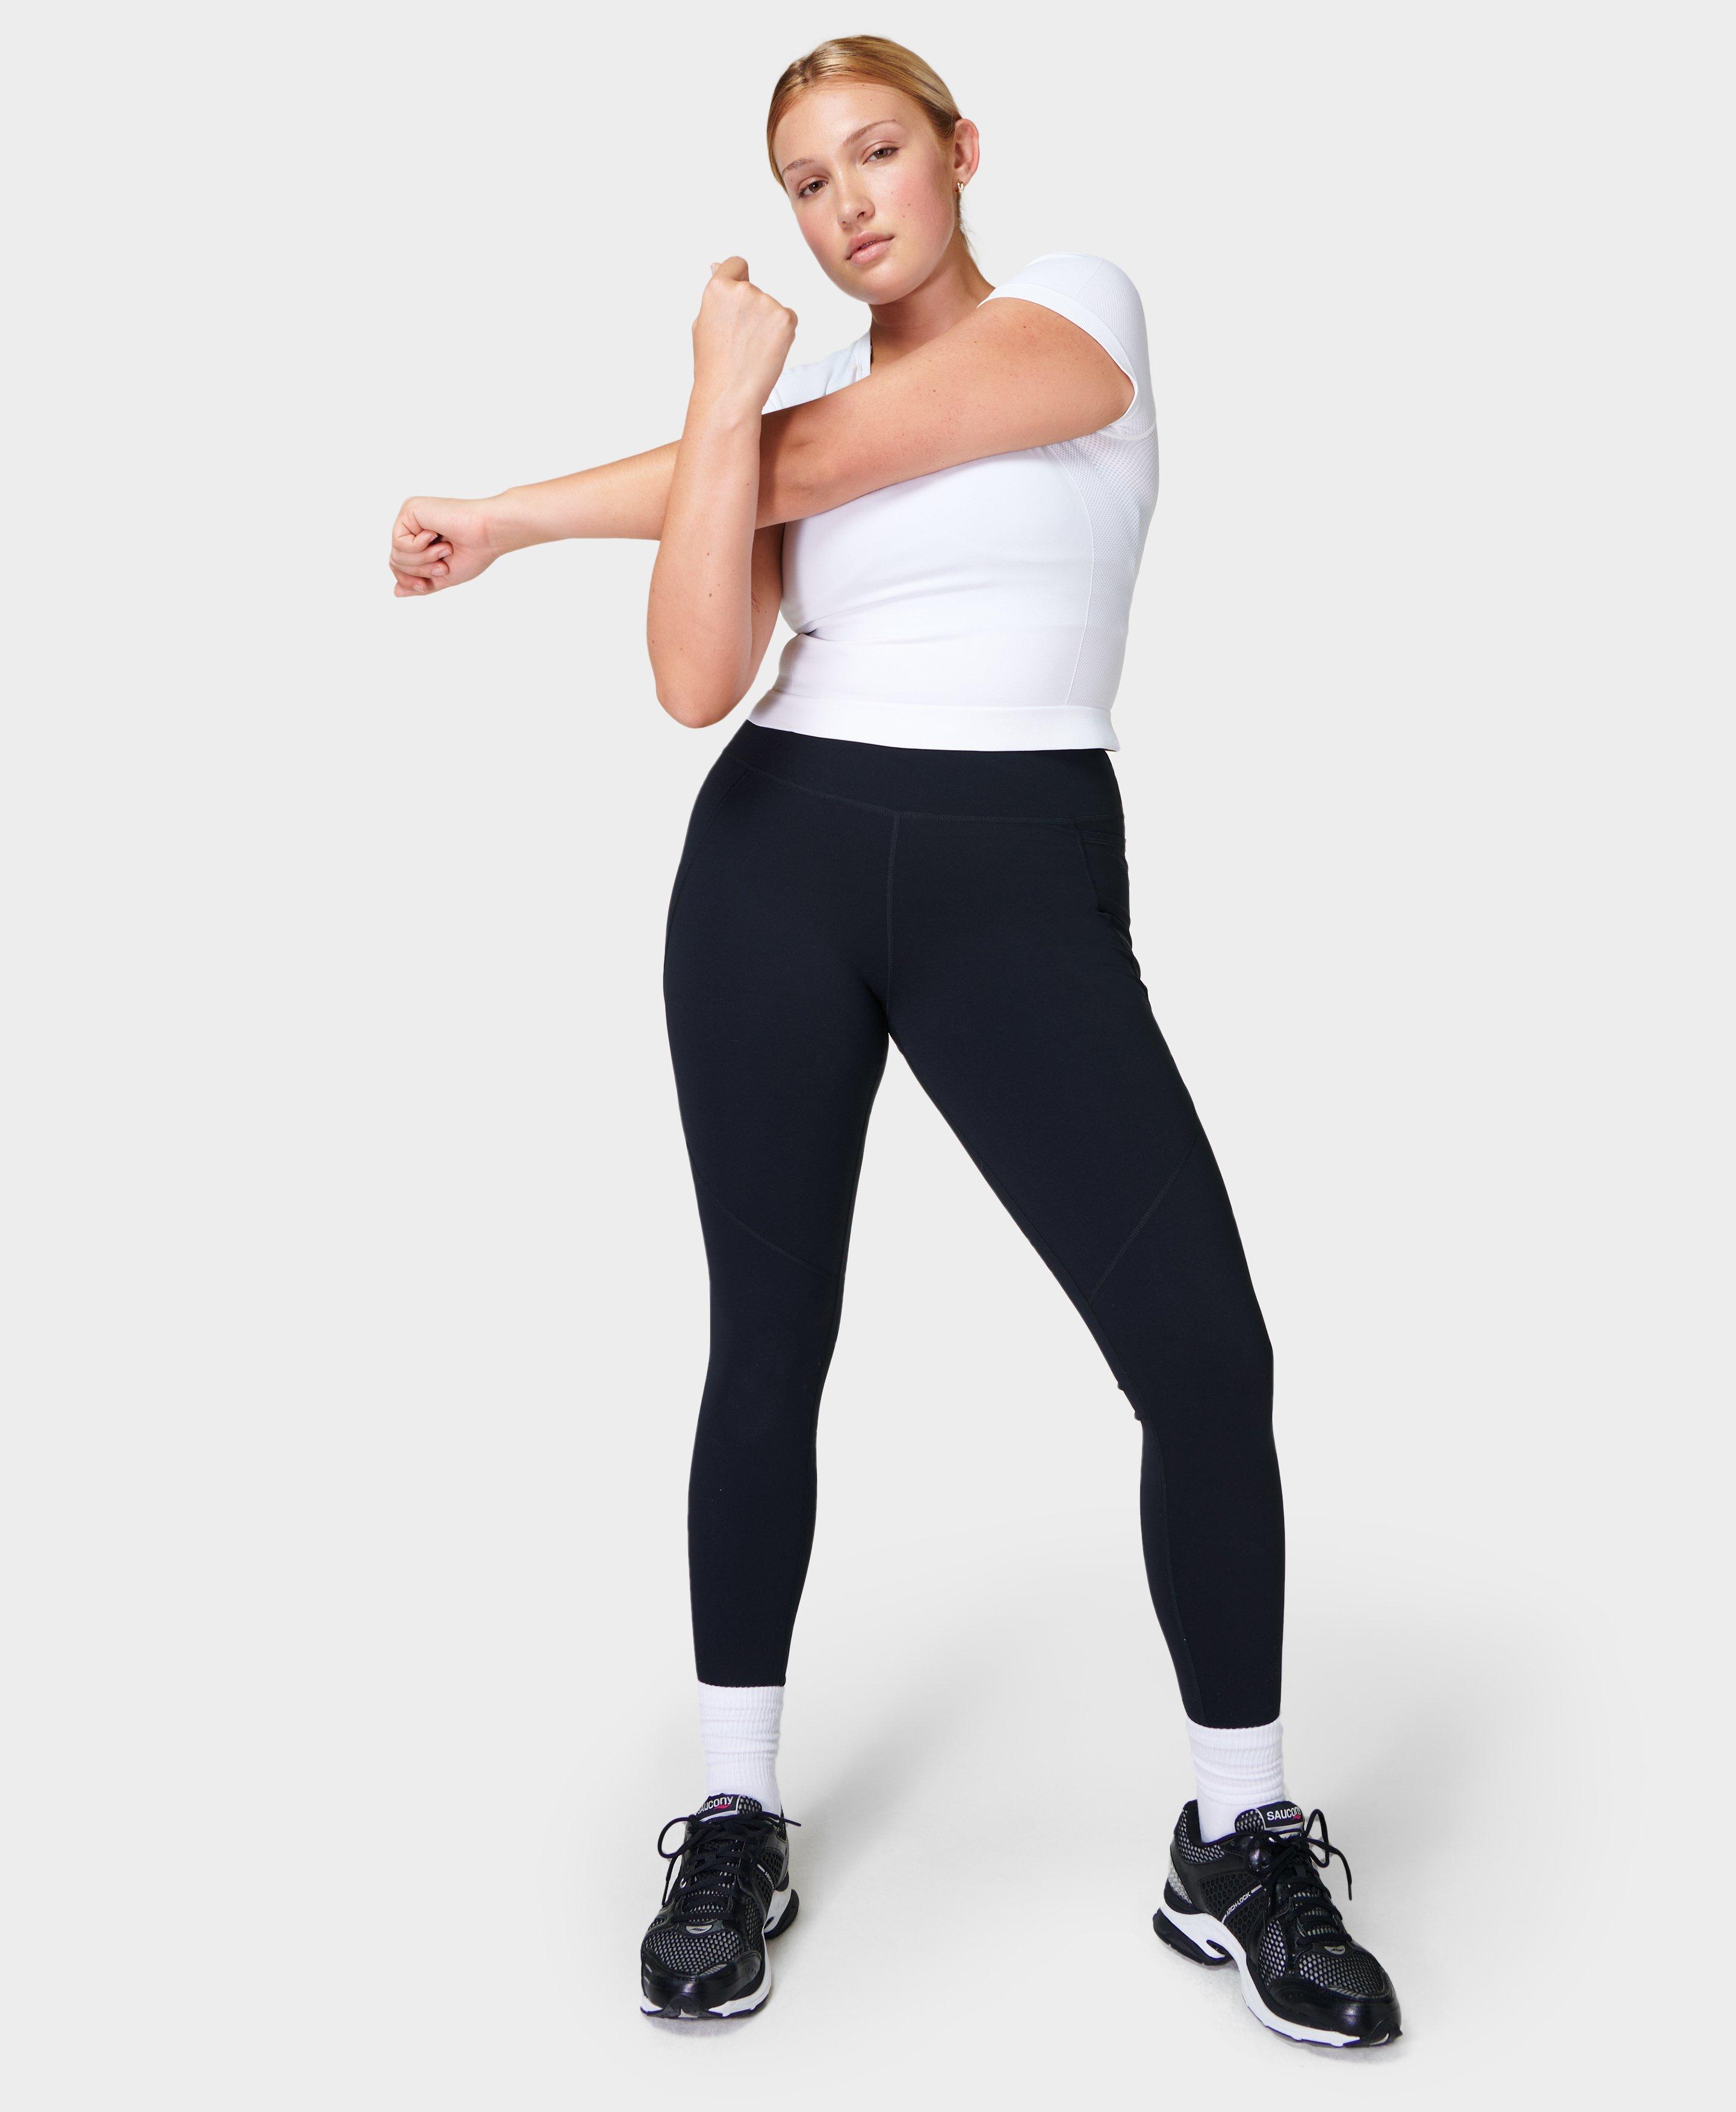 Womens Yoga Set Slim Fit Running And Gym Clothes With Seamless Sport Set  And Pants From Vi3q, $25.58 | DHgate.Com